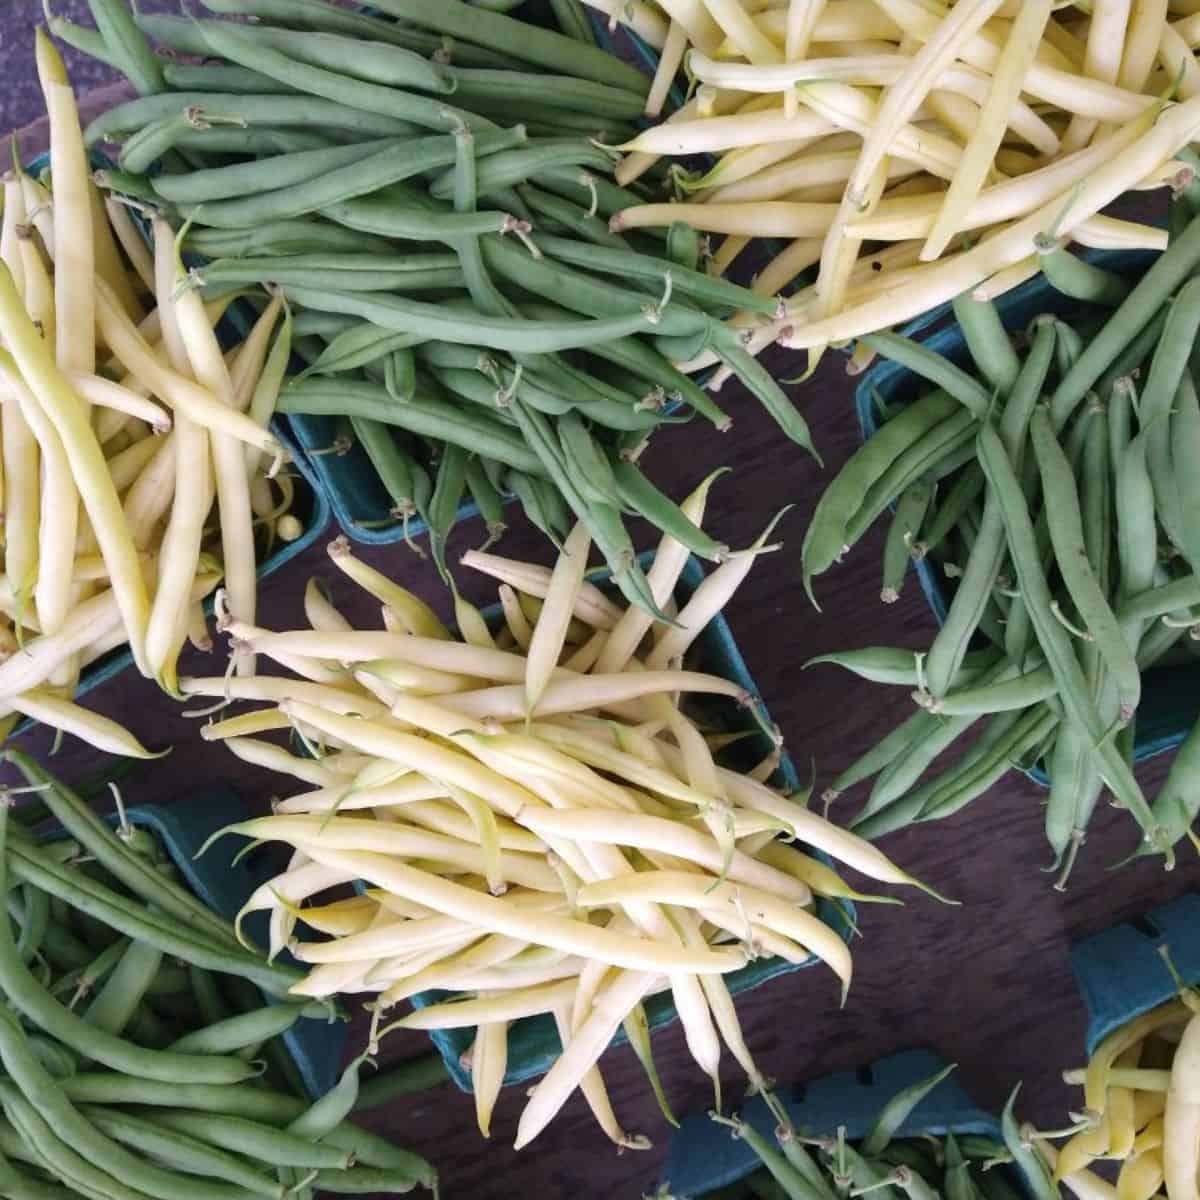 Green beans and wax beans at a farmers market